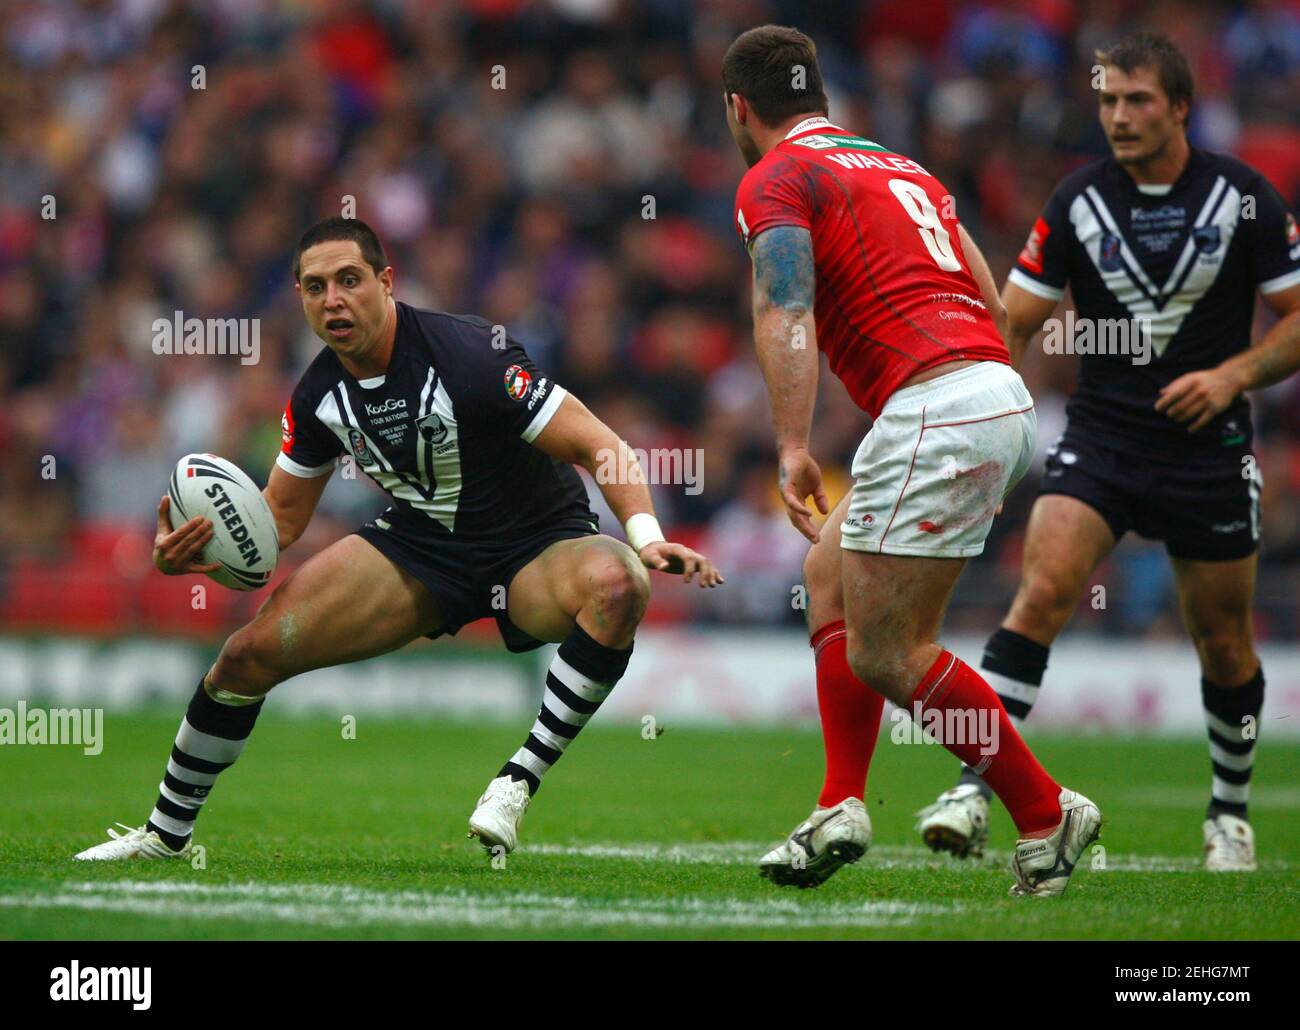 Rugby League - Wales v New Zealand - Gillette Four Nations 2011 - Wembley Stadium - 5/11/11  New Zealand's Gerard Beale (L) in action  Mandatory Credit: Action Images / Peter Cziborra Stock Photo